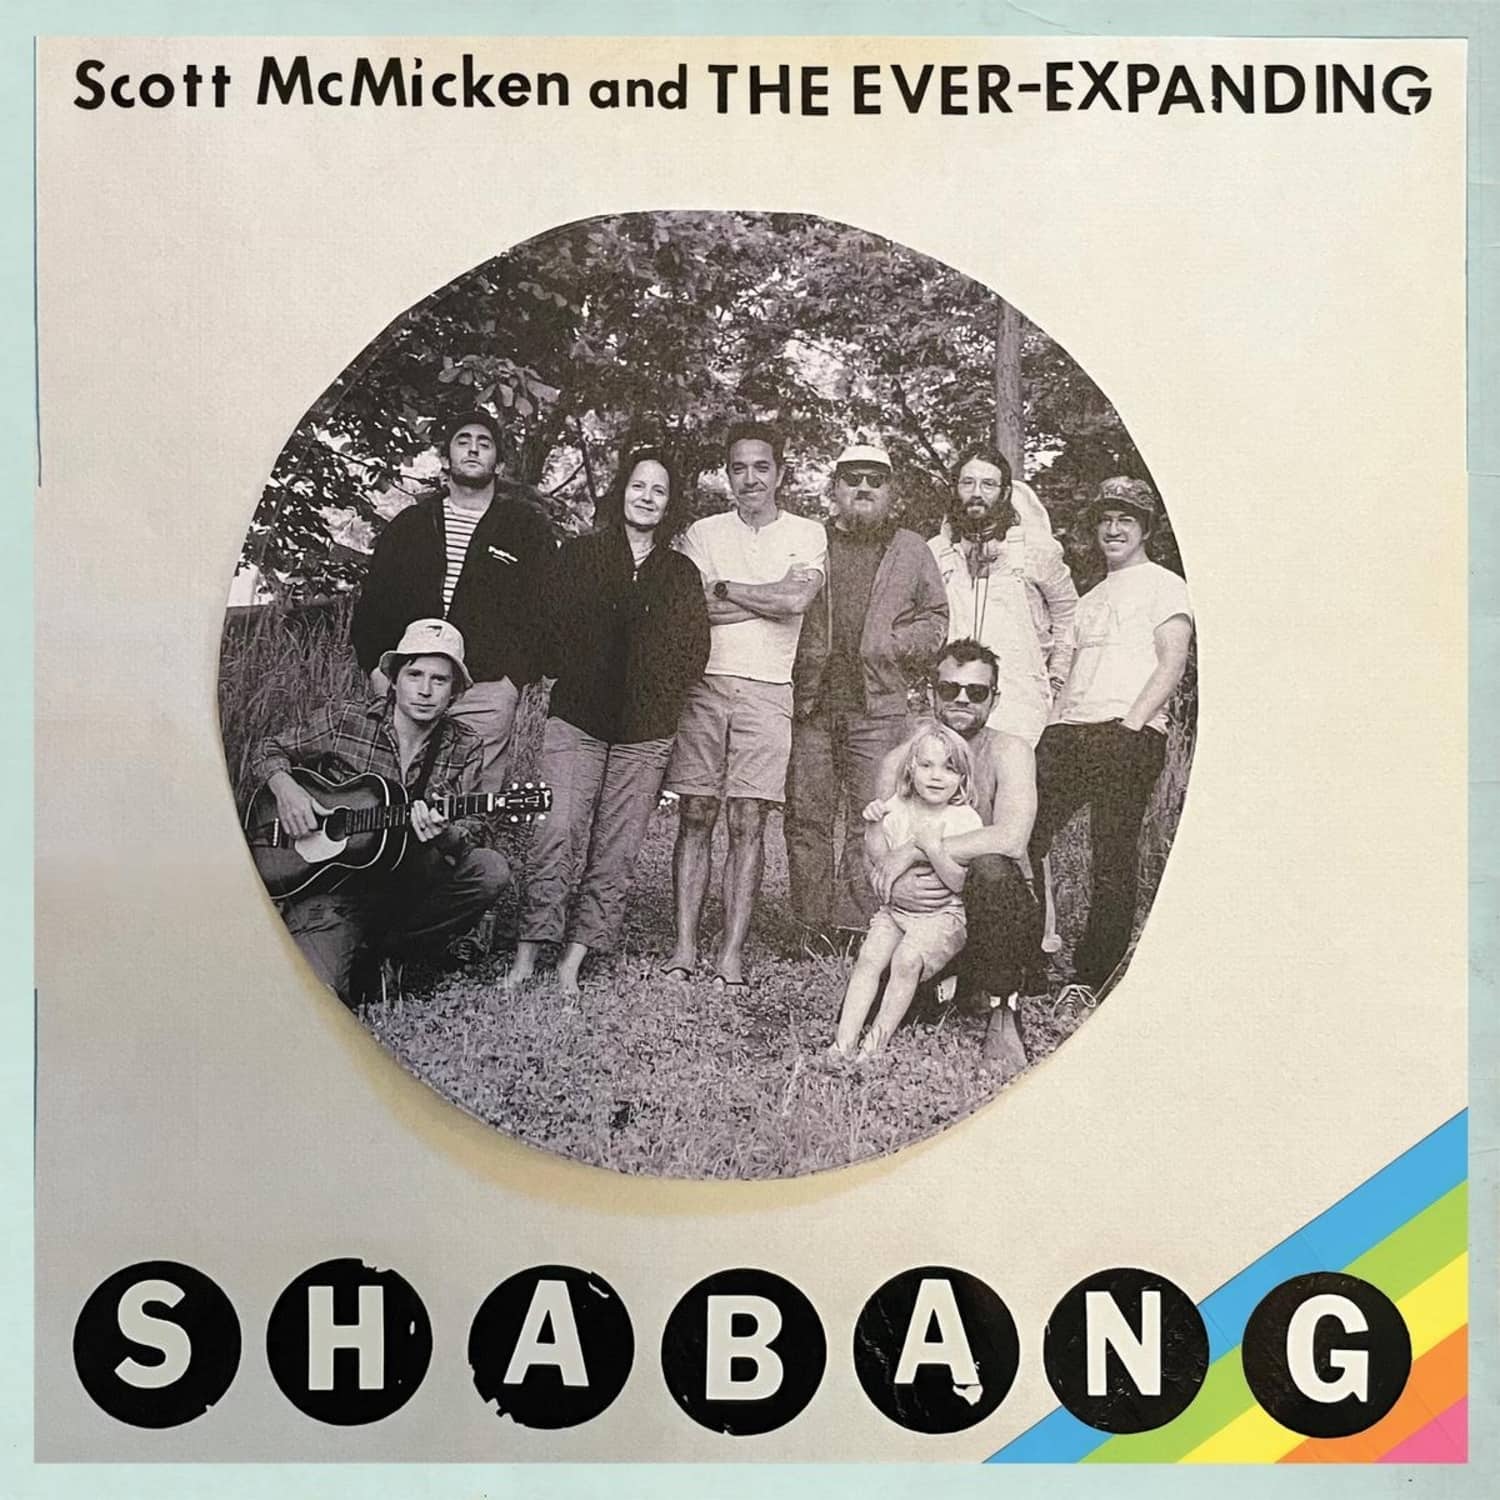  Scott And The Ever-Expanding McMicken - SHABANG 